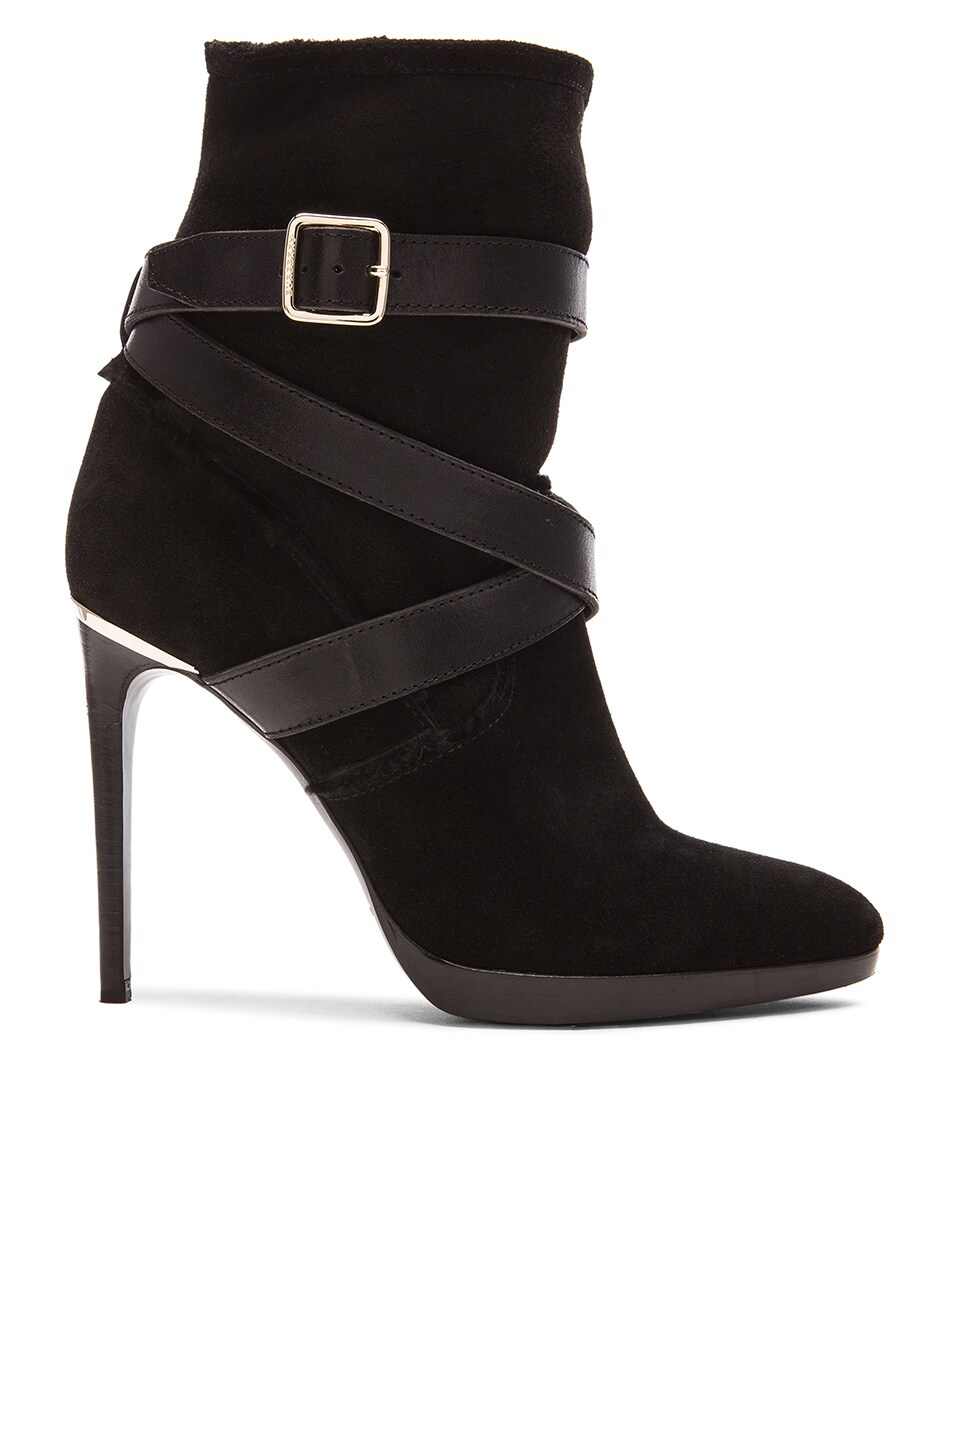 Image 1 of Burberry Prorsum Cadey Strap Suede & Sheep Shearling Booties in Black